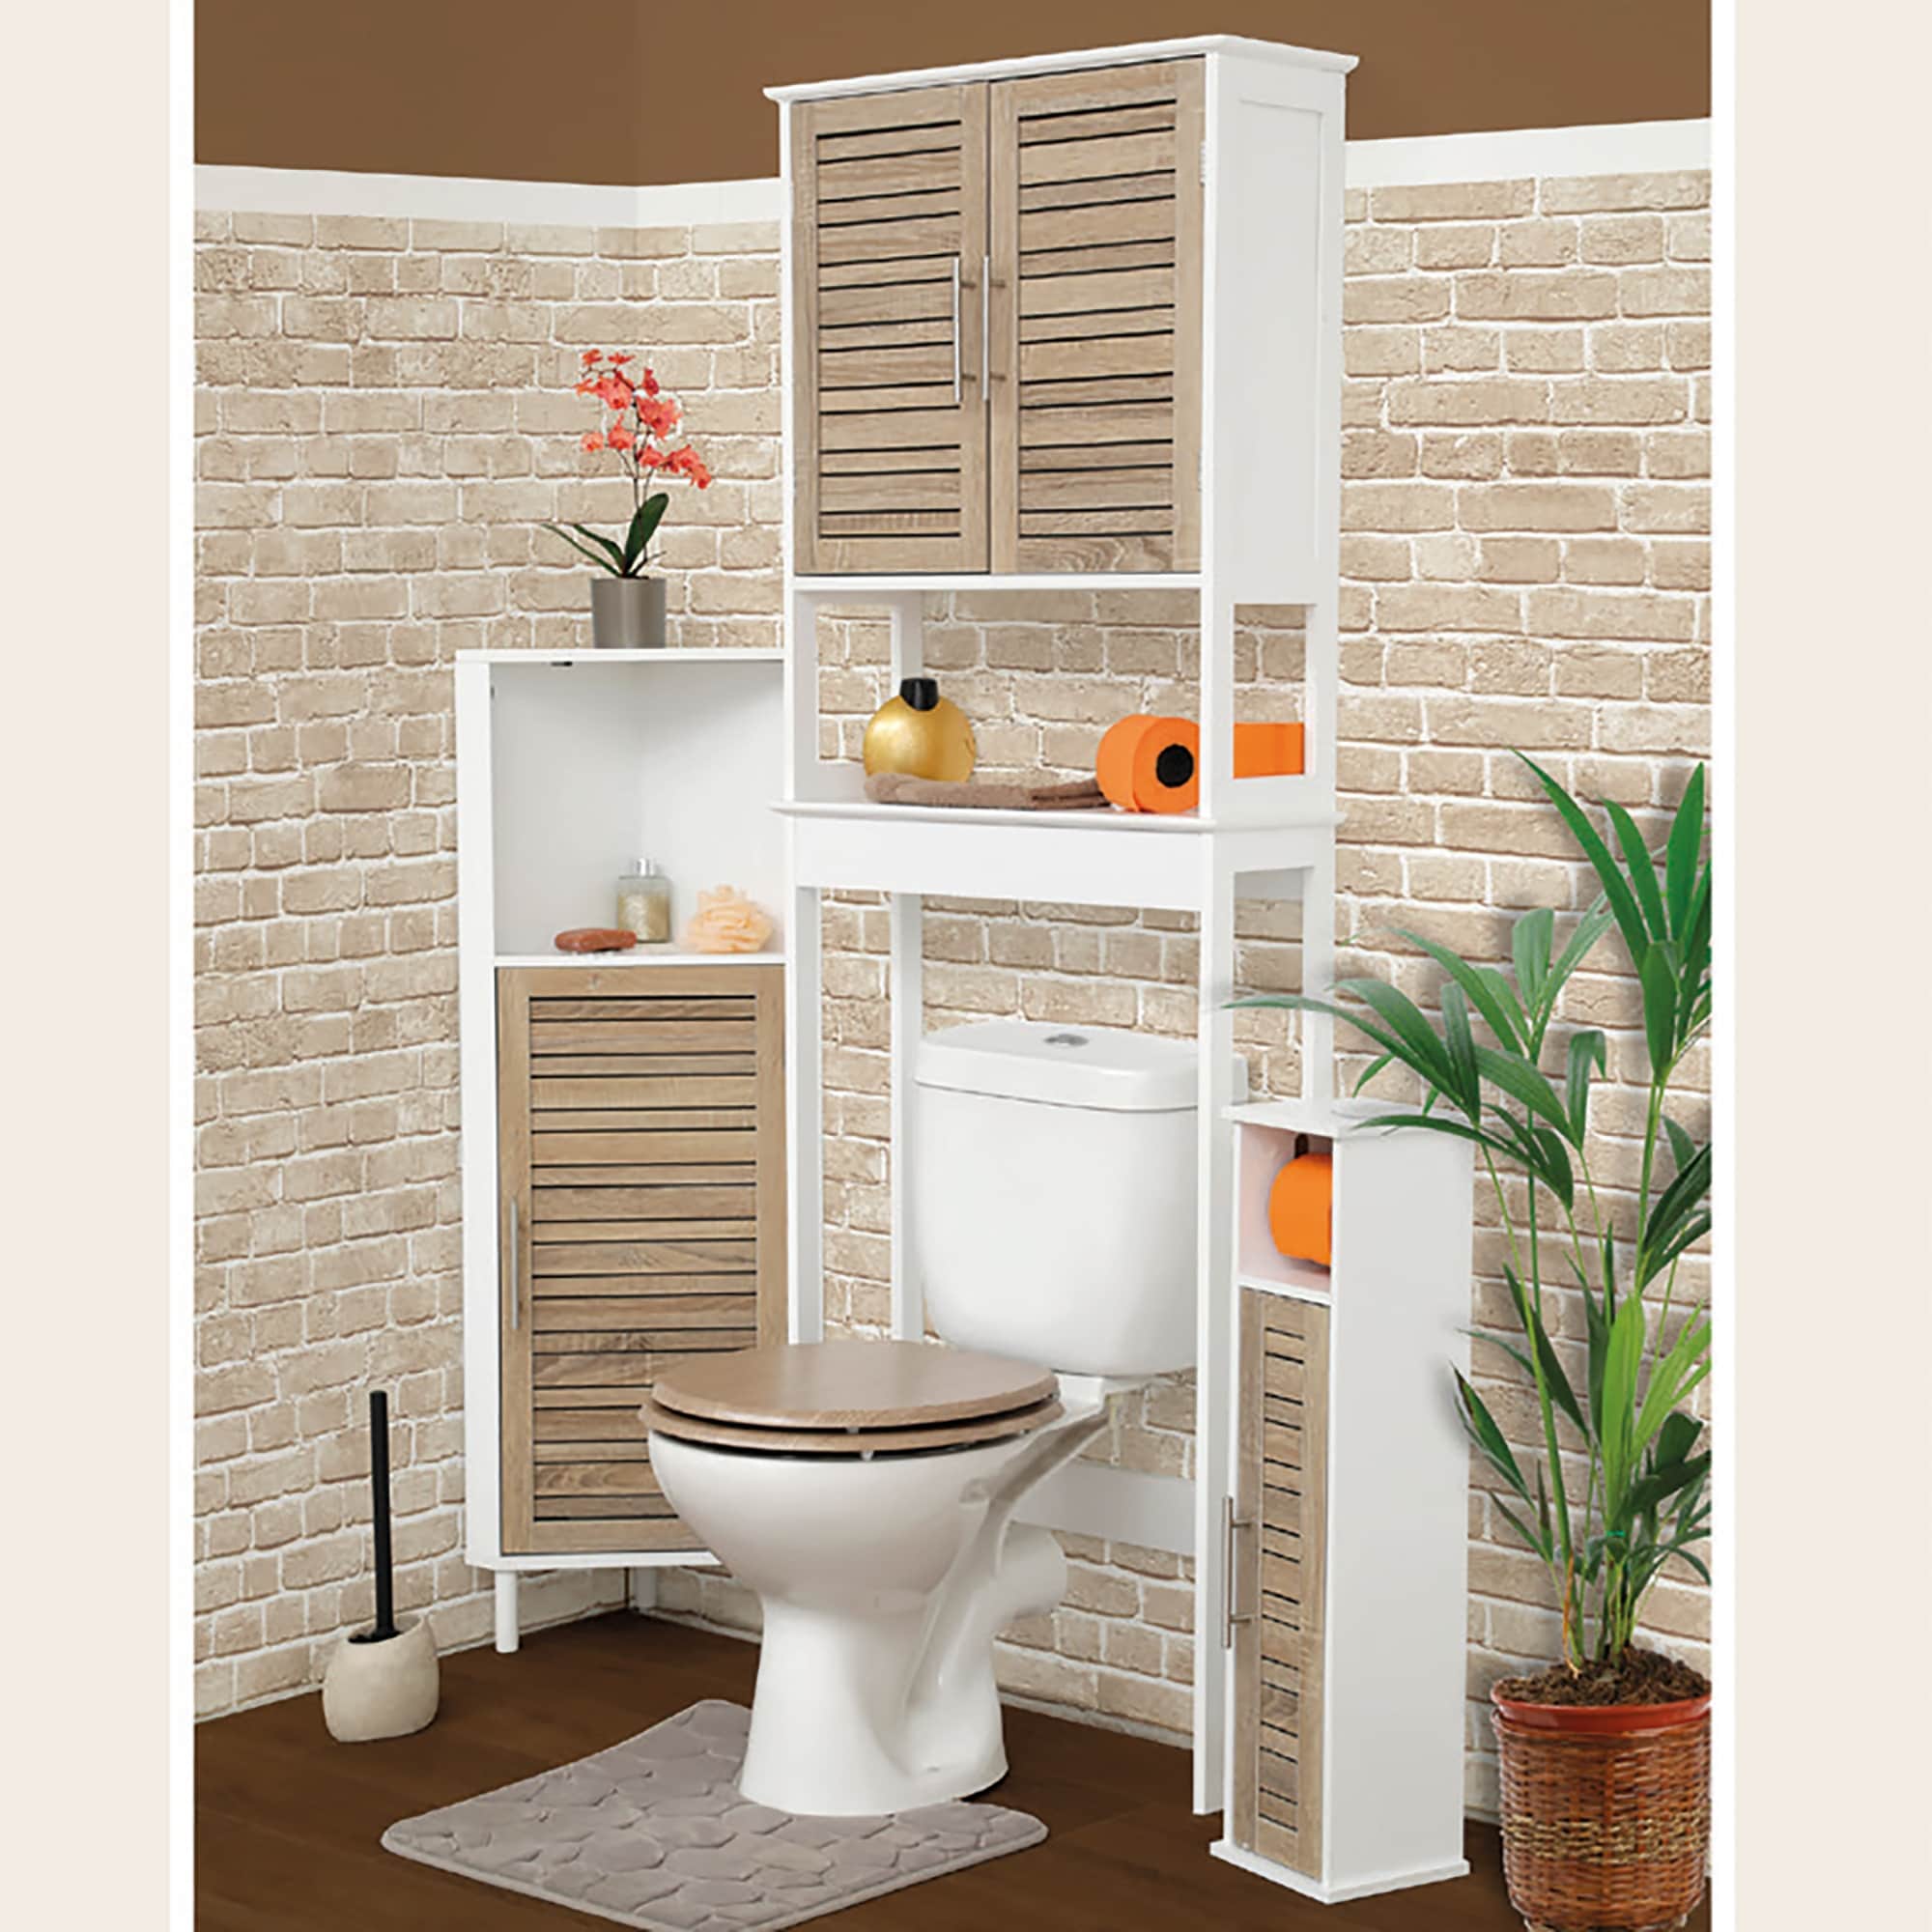 https://ak1.ostkcdn.com/images/products/is/images/direct/5f3e5f9d04a6679bc7f9065aa3dae39d629c0fdc/2-in-1-Toilet-Paper-Holder-Stand-Cabinet-and-Reserve.jpg